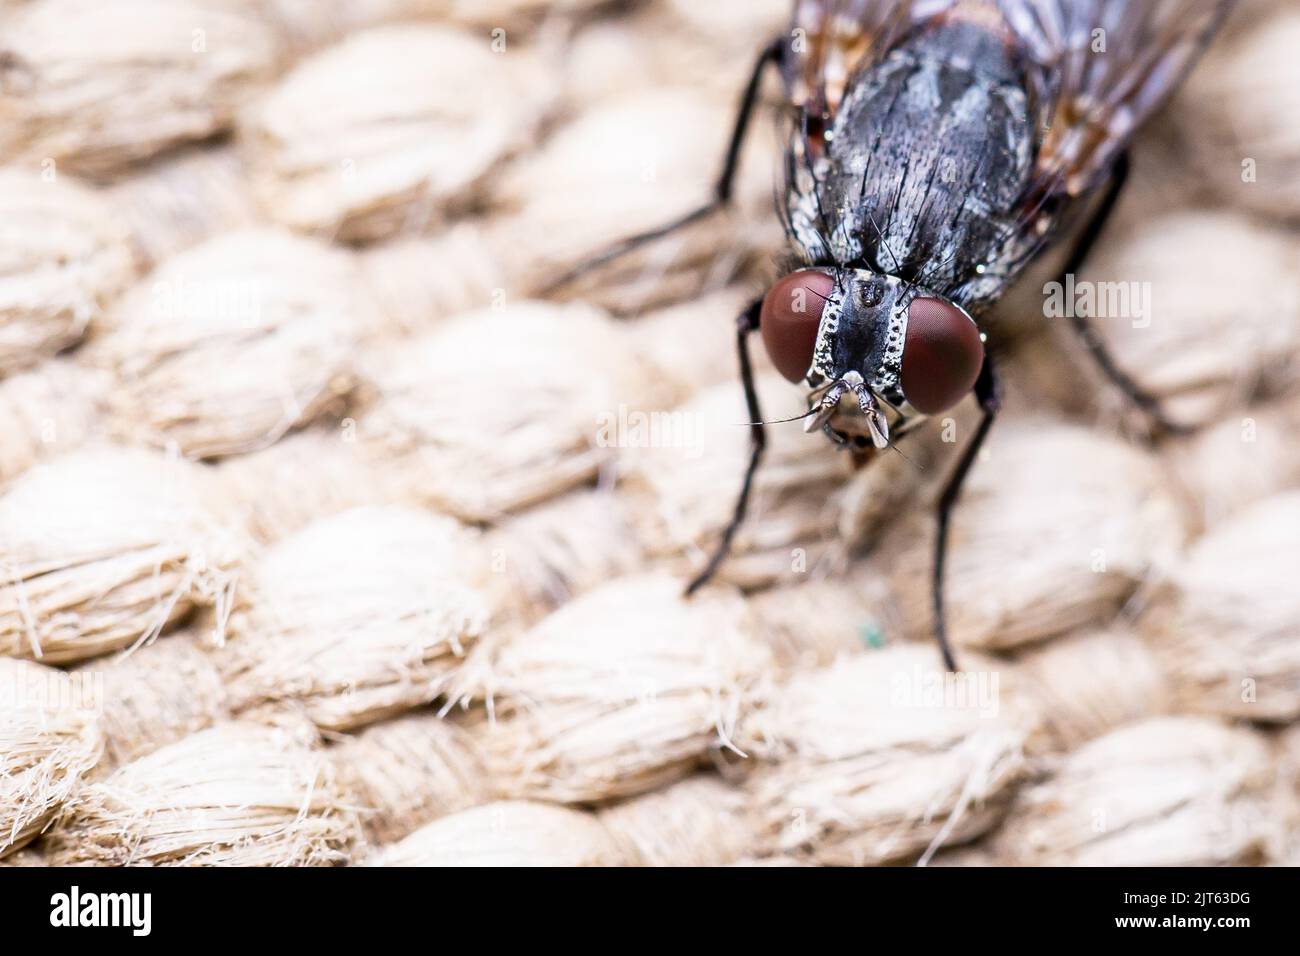 A macro focus shot of a housefly stand on a burlap surface Stock Photo